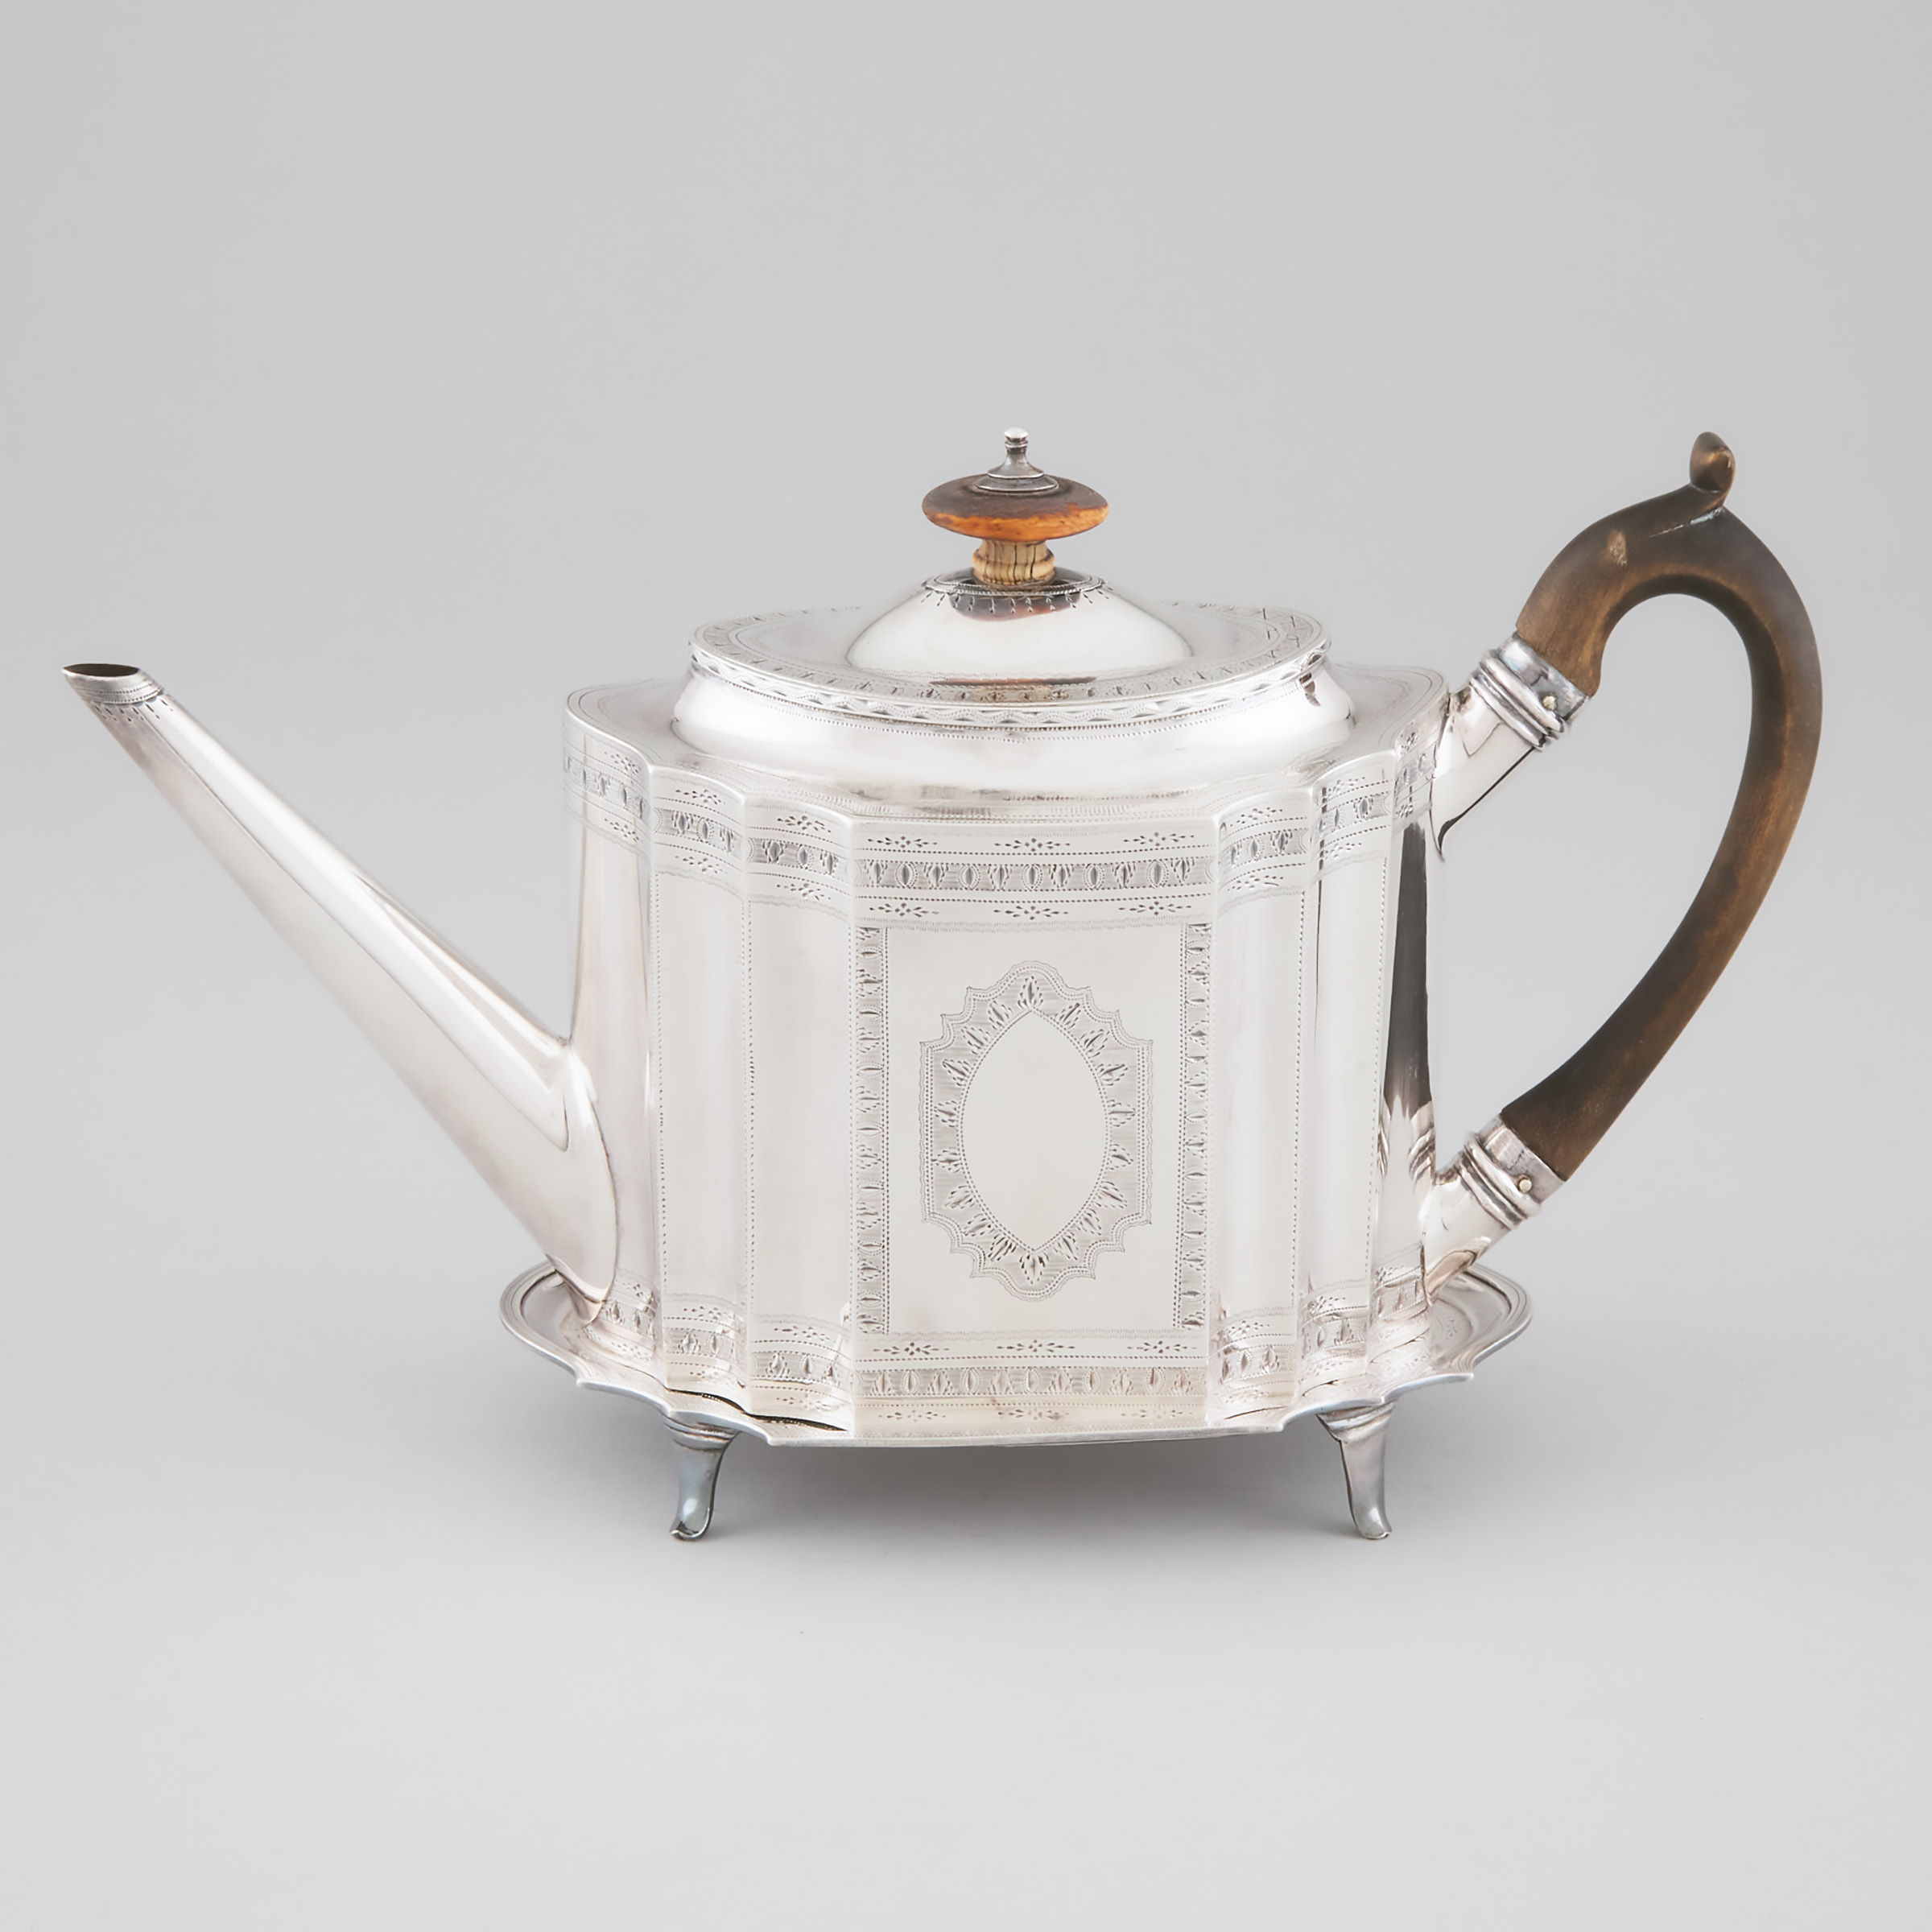 George III Silver Bright-Cut Shaped Oval Teapot and Stand, Charles Hougham, London, 1791/92